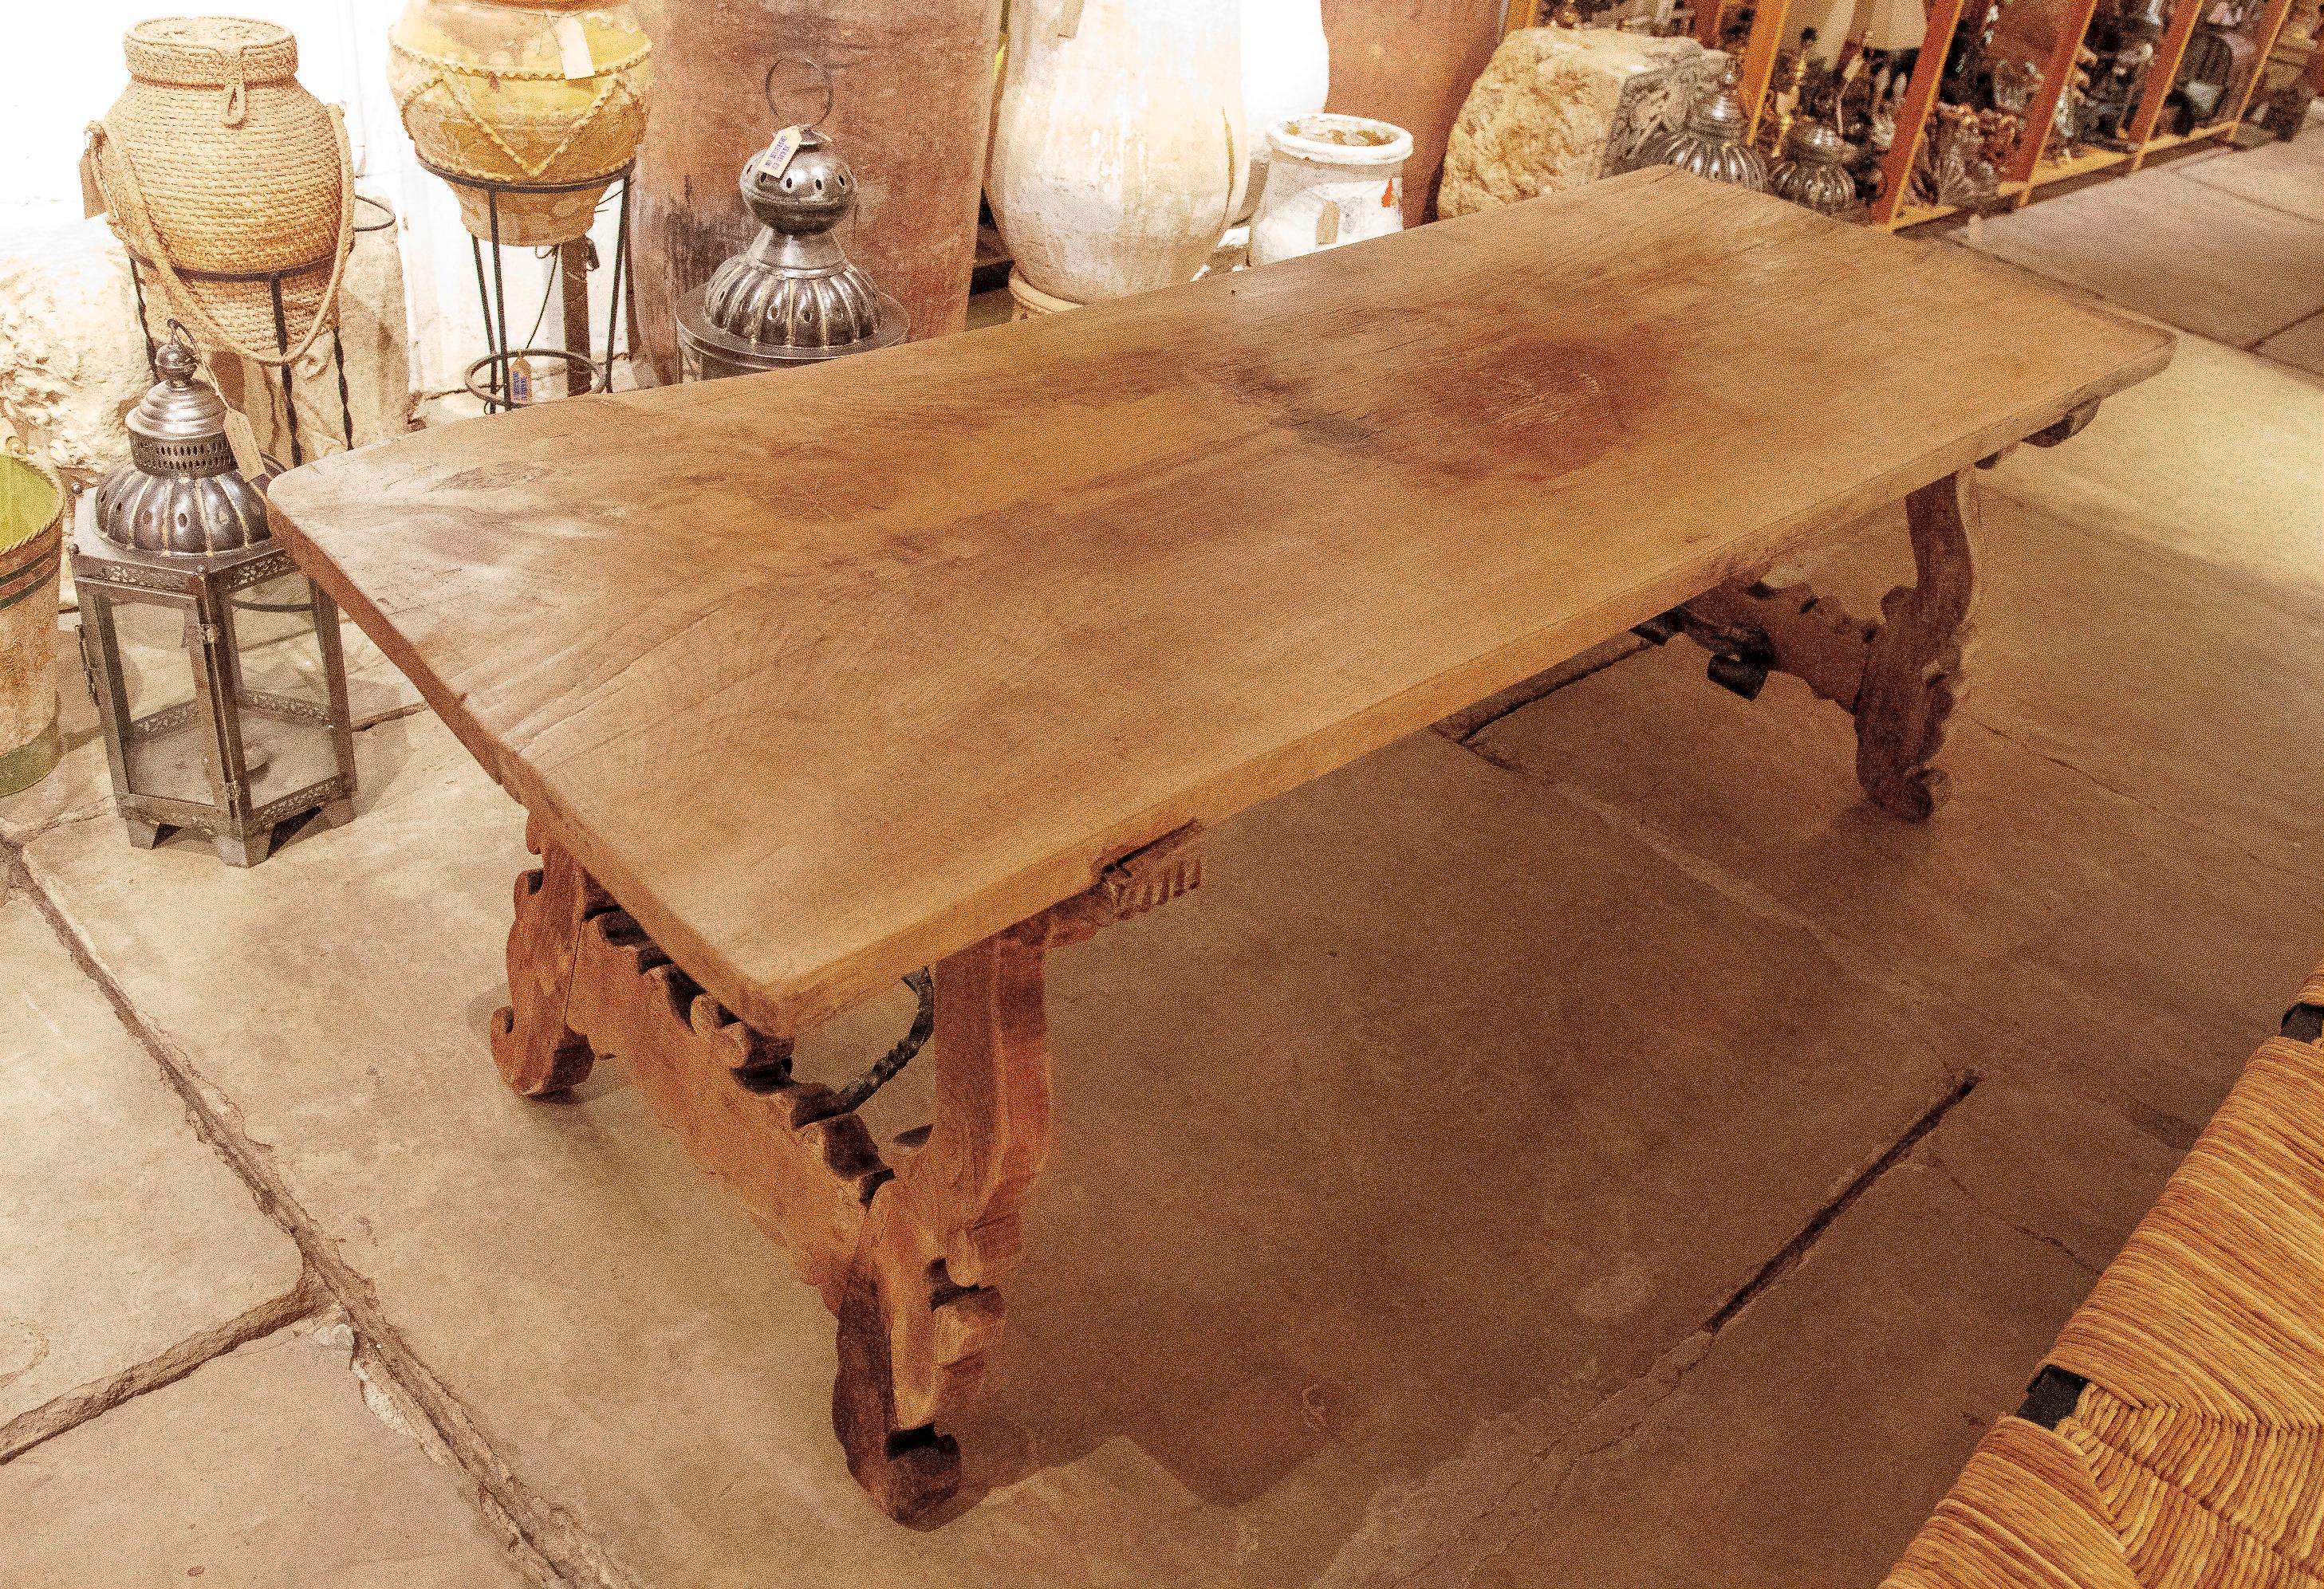 Spanish Large Wooden Table with Hand-Carved Legs and Original Iron Fittings For Sale 1